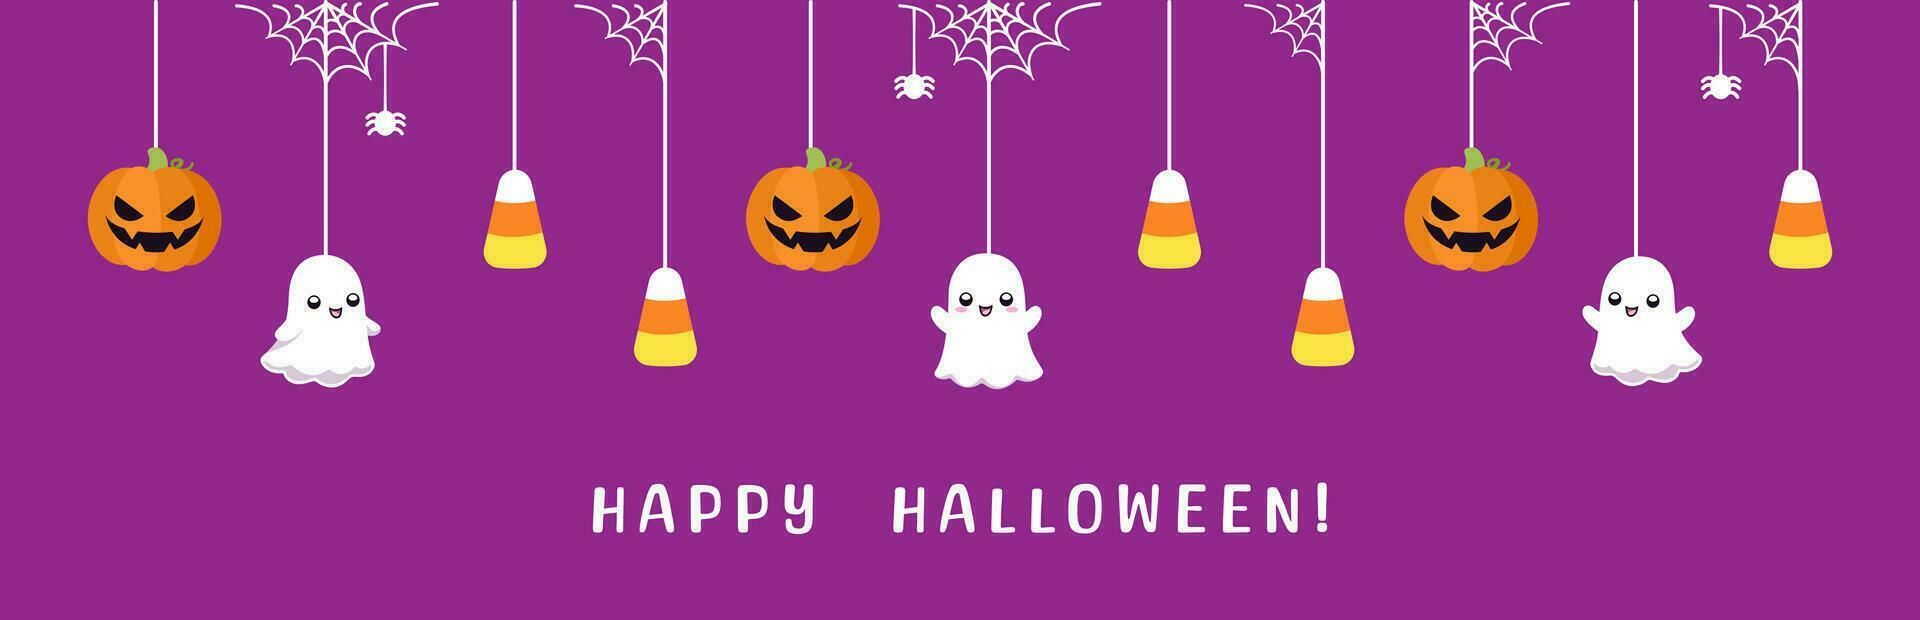 Happy Halloween border banner with ghost, candy corn and jack o lantern pumpkins. Hanging Spooky Ornaments Decoration Vector illustration, trick or treat party invitation